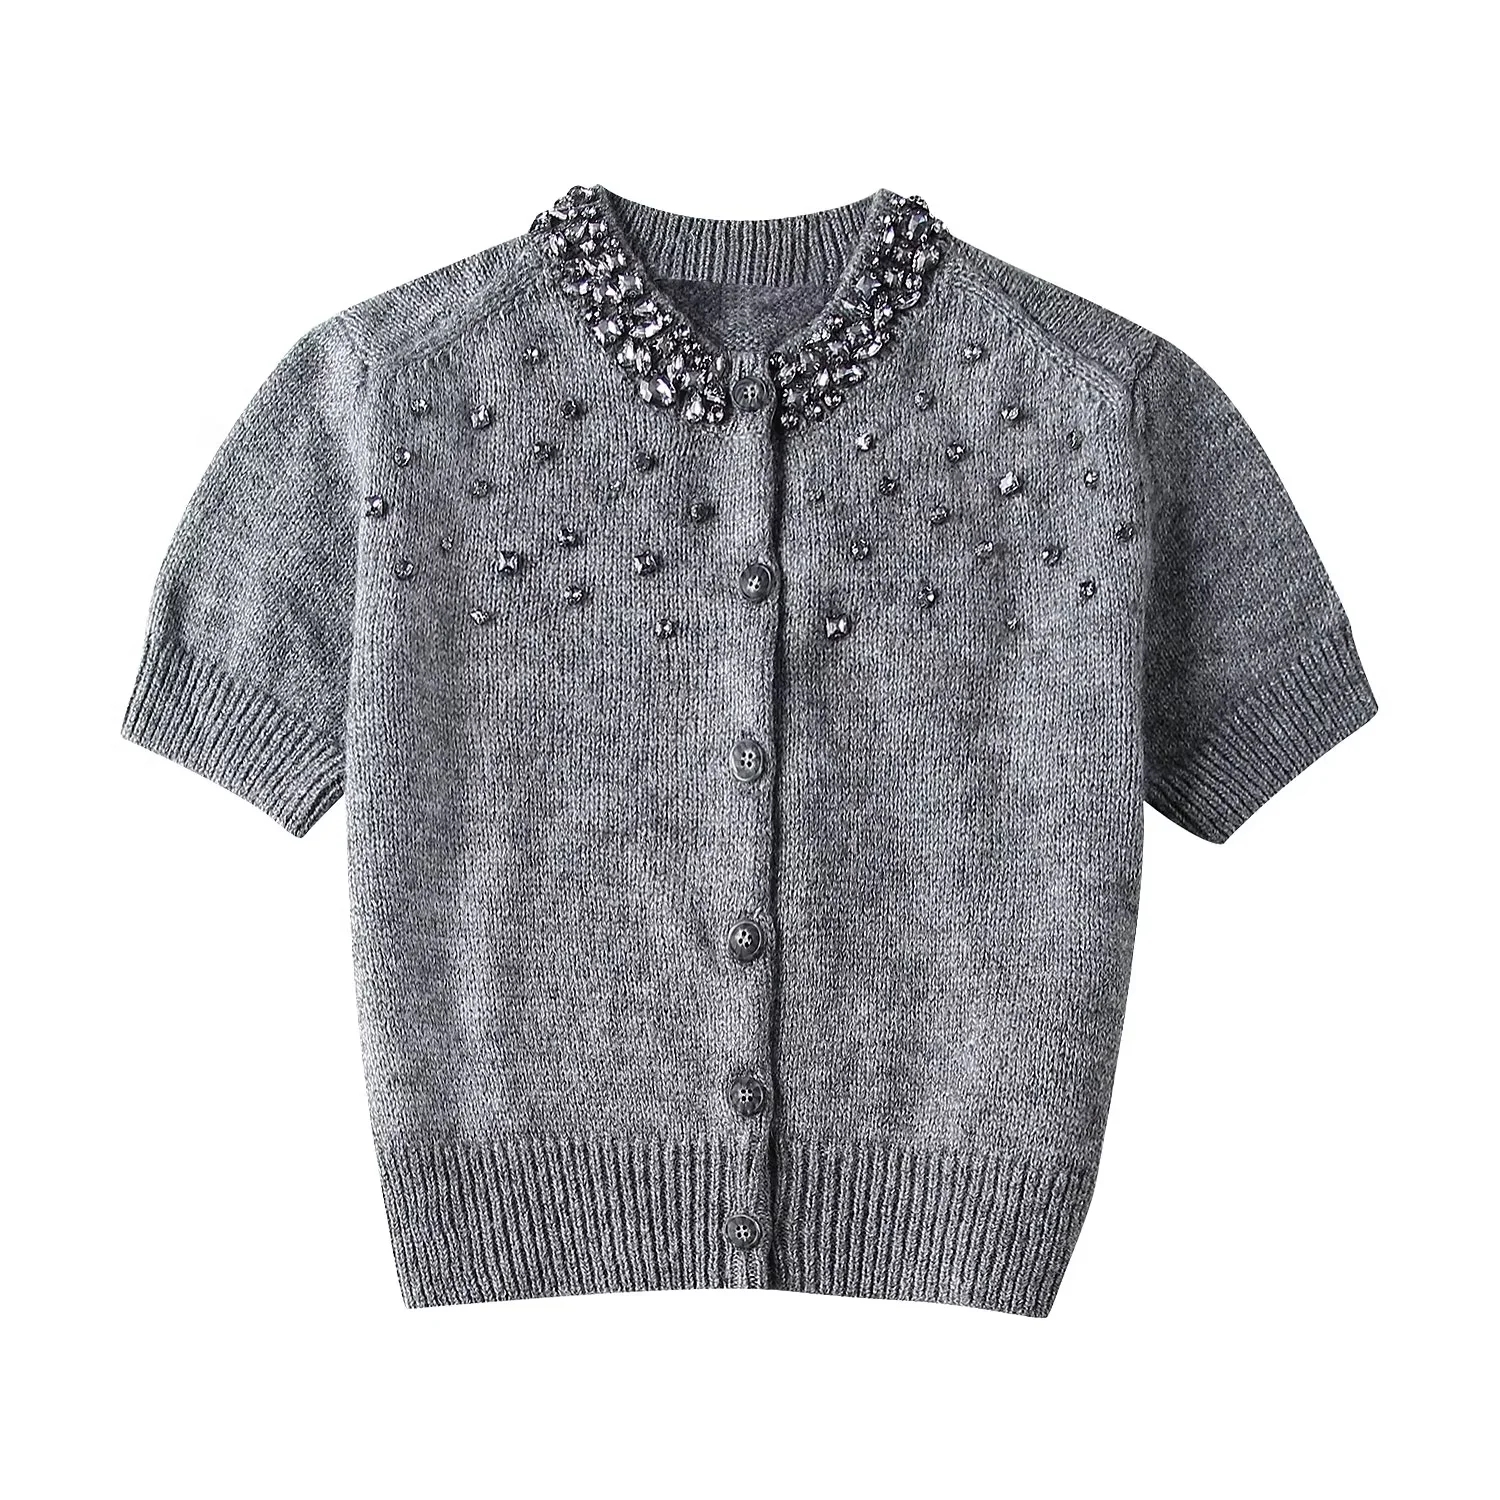 Fashion Grey Jeweled Knitted Buttoned Sweater,Sweater